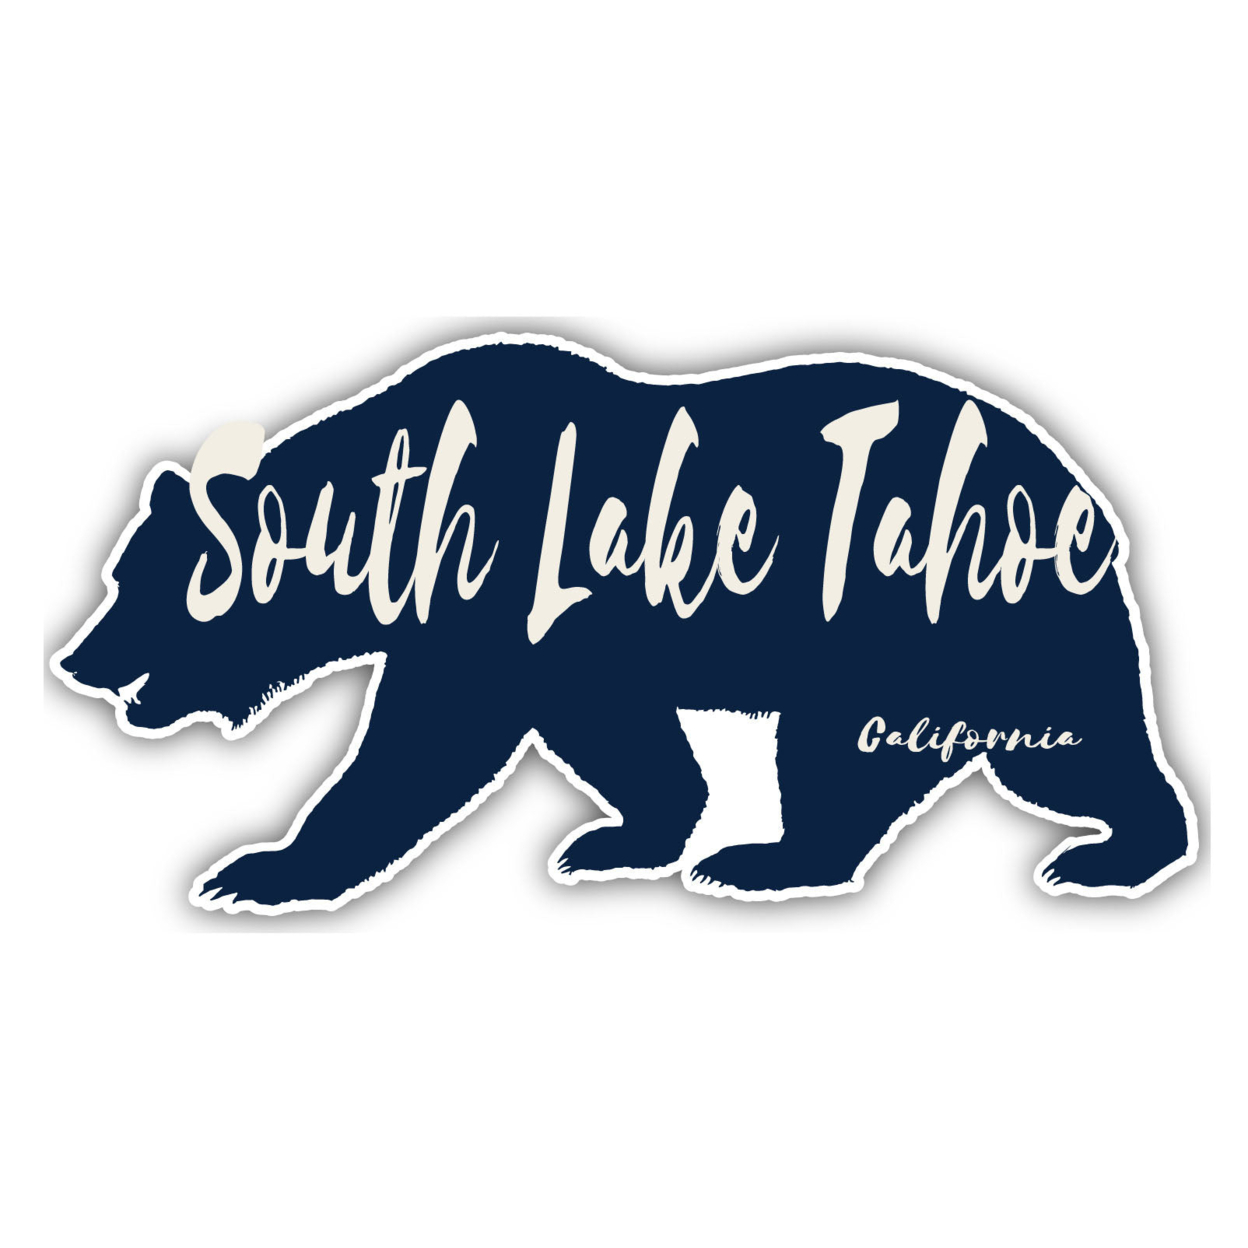 South Lake Tahoe California Souvenir Decorative Stickers (Choose Theme And Size) - Single Unit, 2-Inch, Camp Life